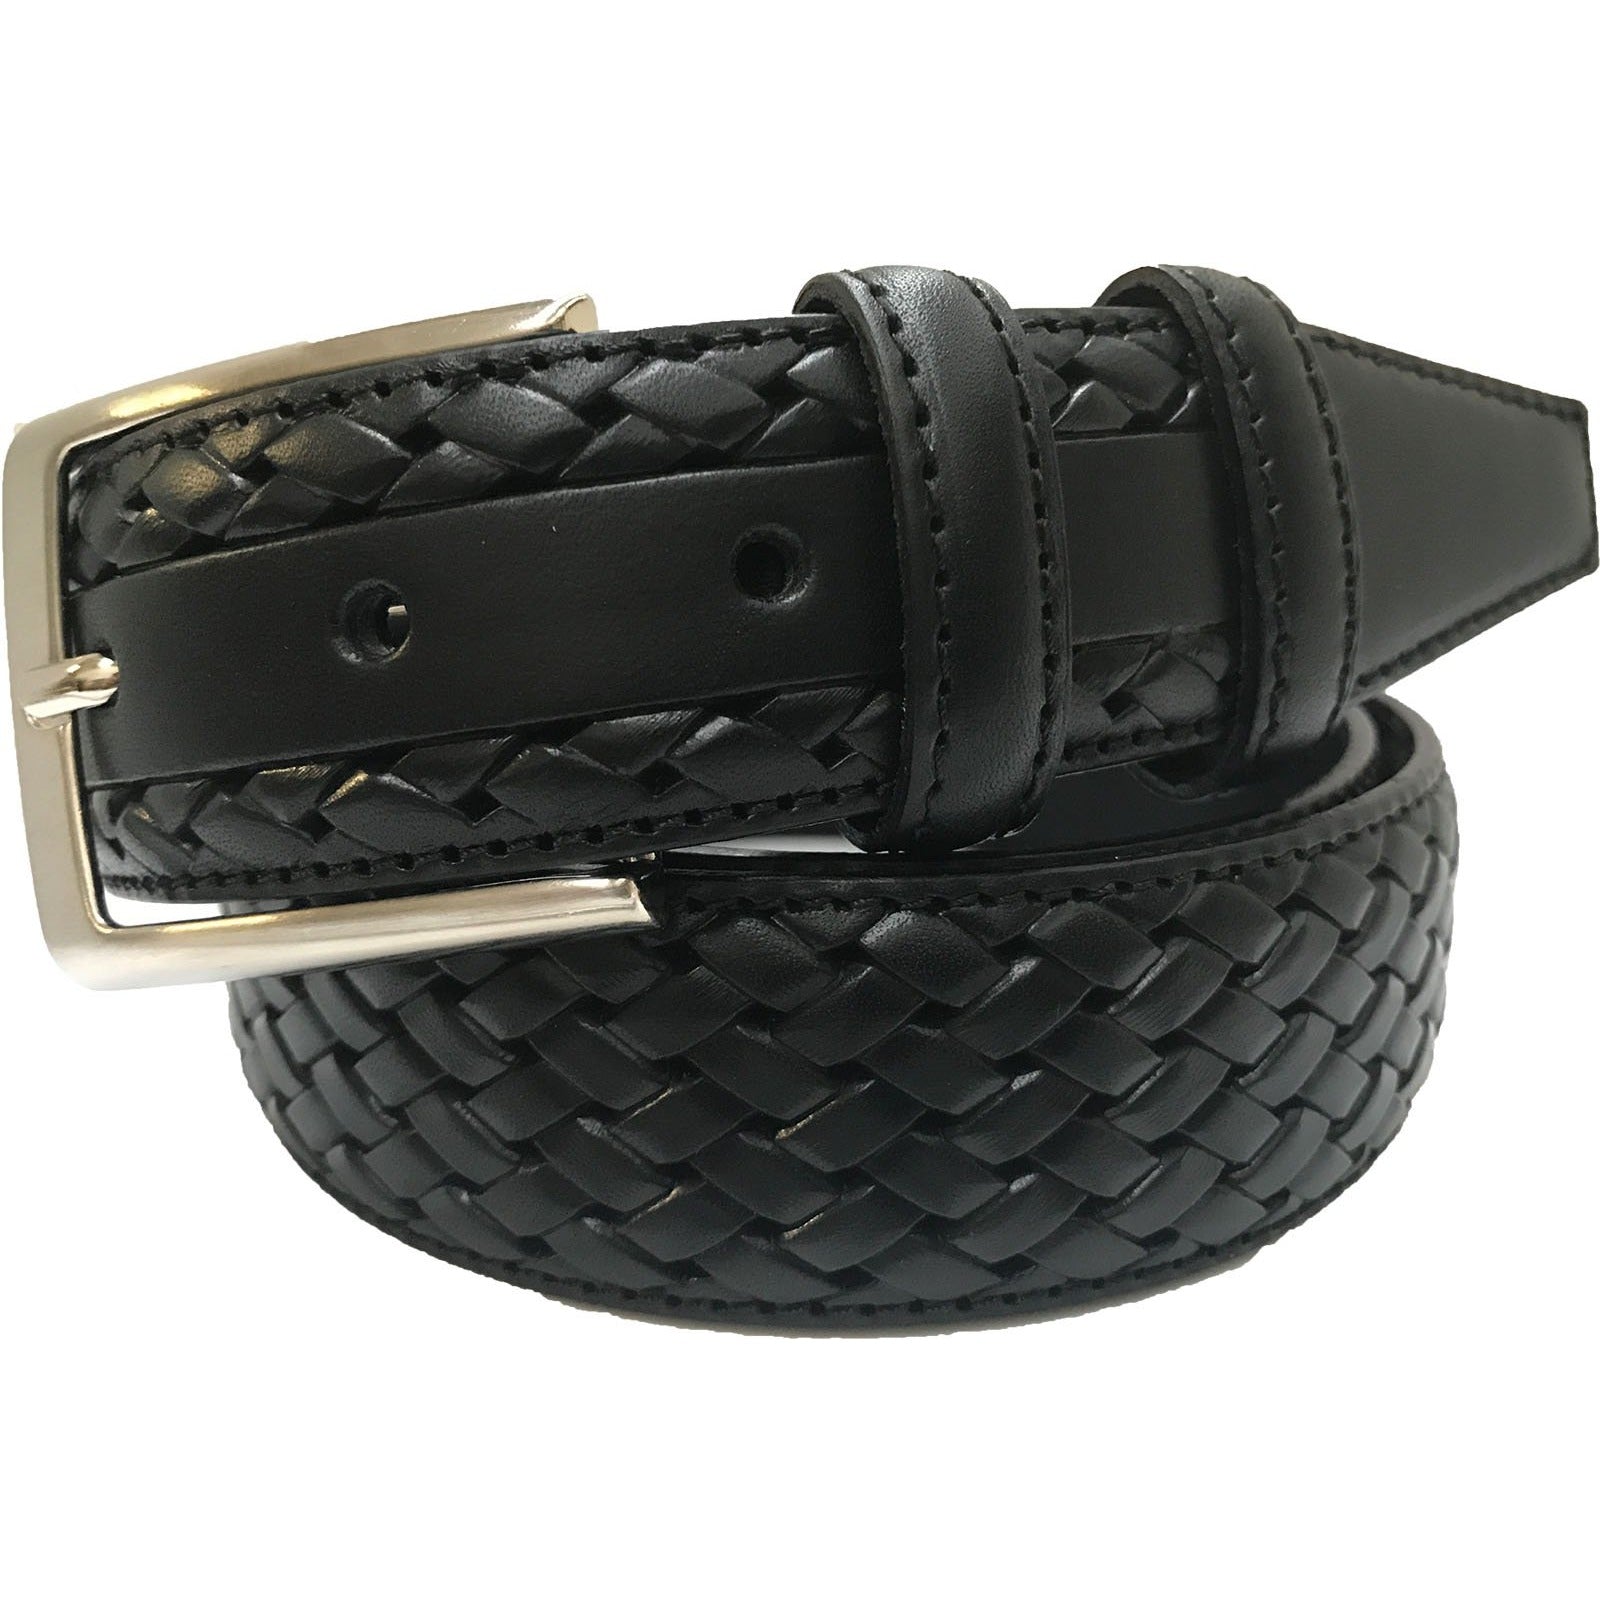 BLACK CALF LEATHER WEAVE EMBOSSED 35MM LEATHER BELT